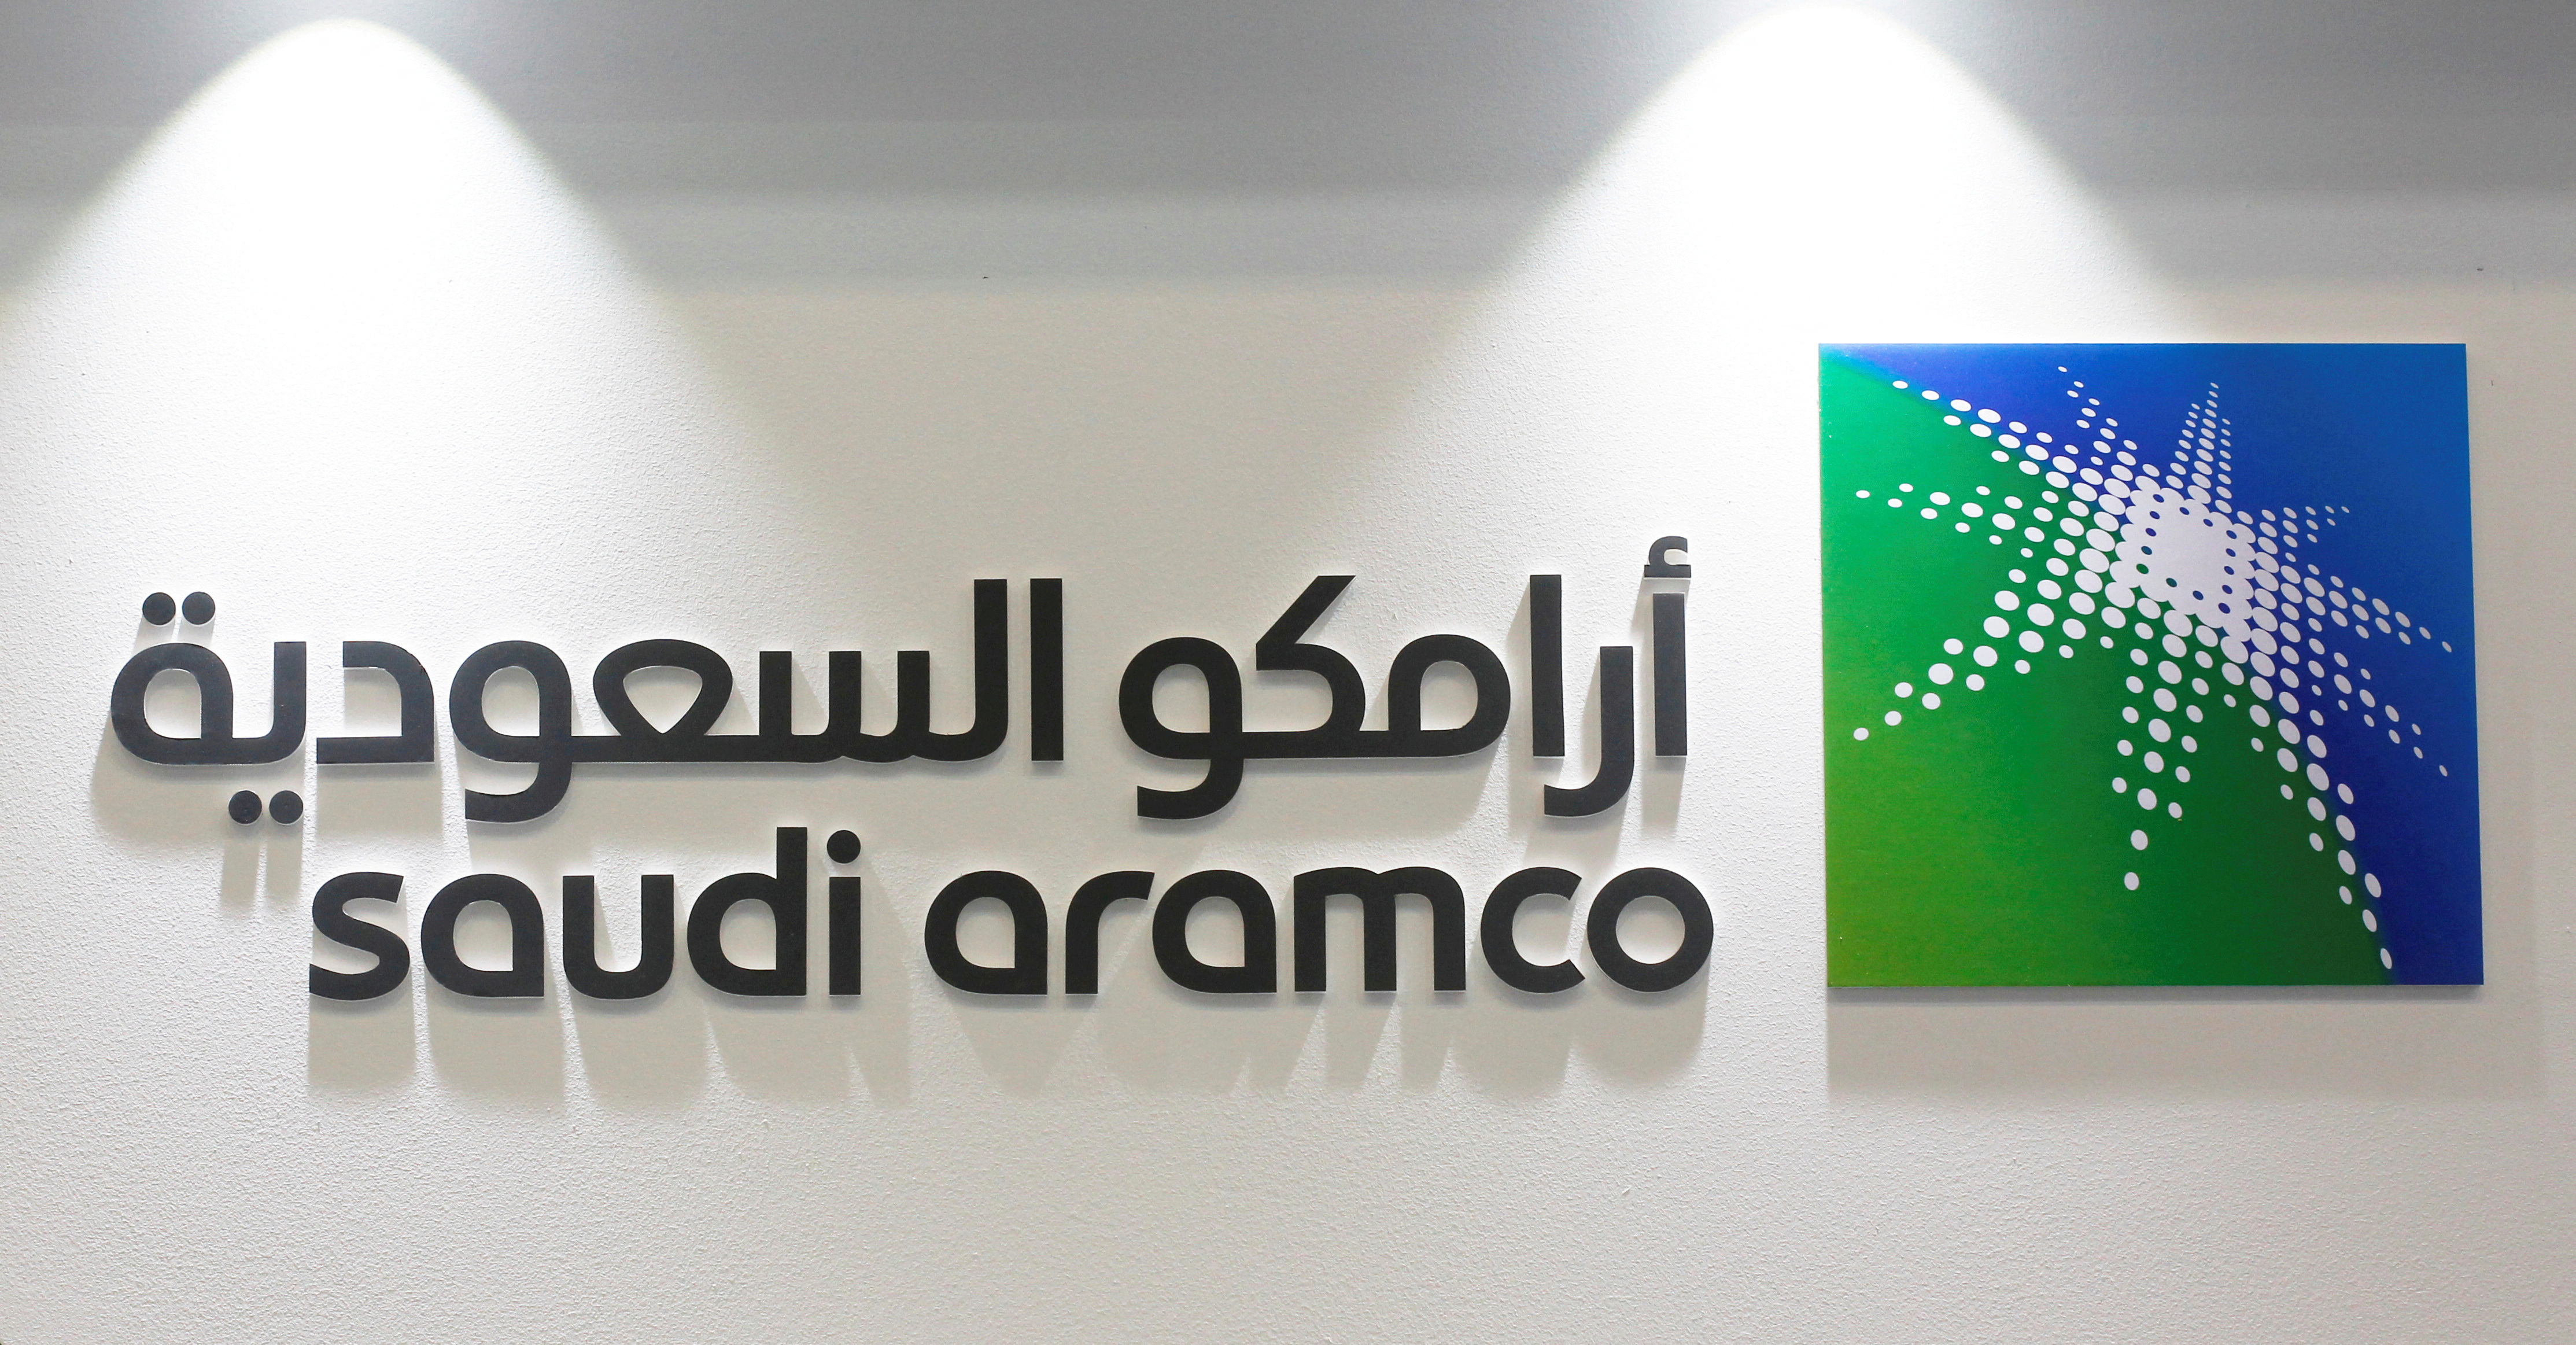 Logo of Saudi Aramco is seen at the 20th Middle East Oil & Gas Show and Conference (MOES 2017) in Manama